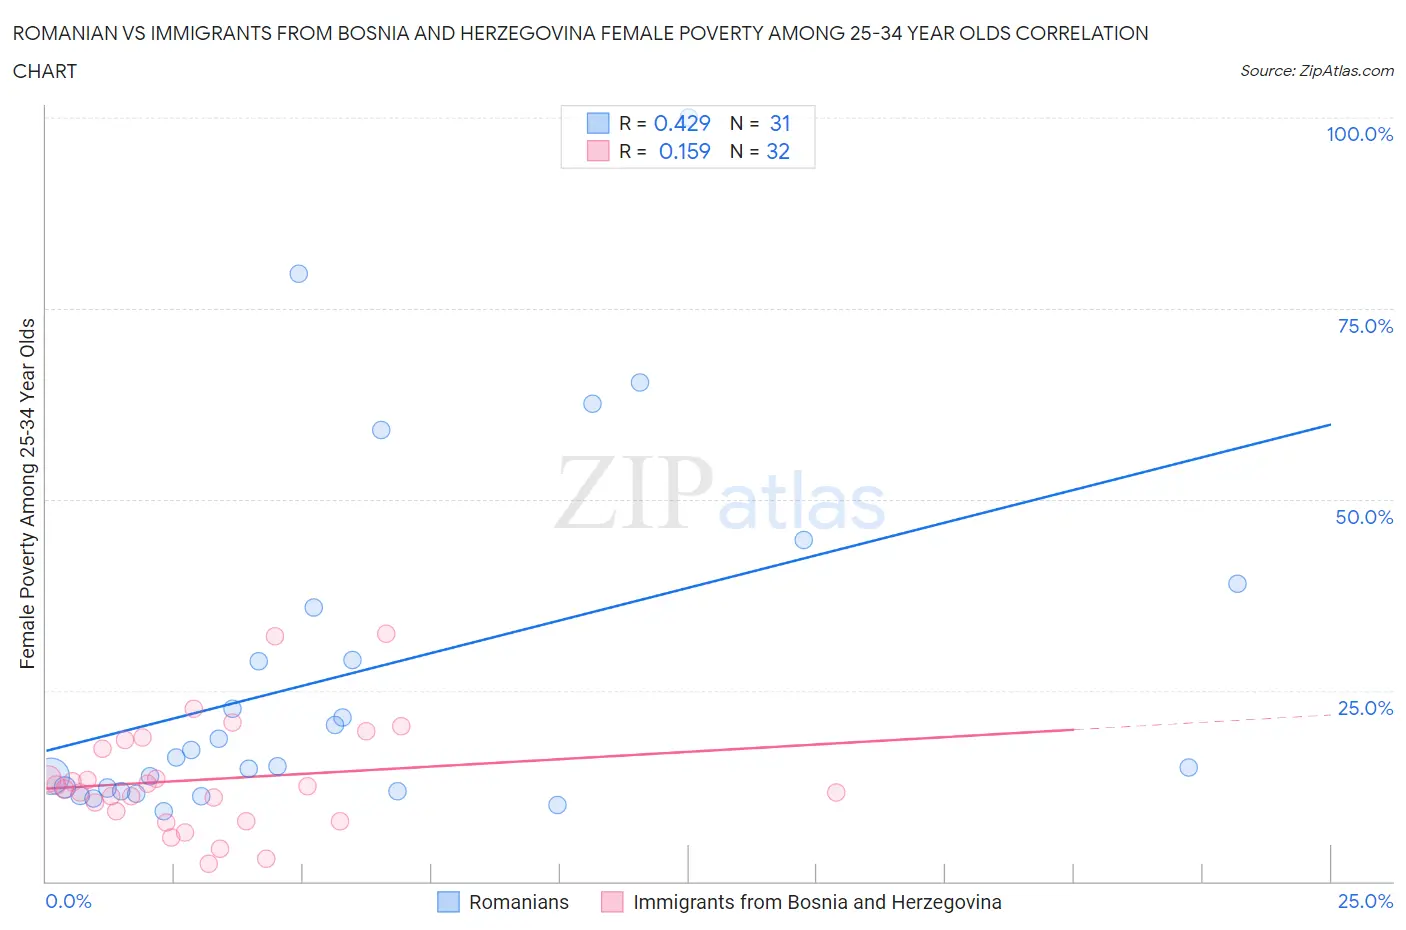 Romanian vs Immigrants from Bosnia and Herzegovina Female Poverty Among 25-34 Year Olds